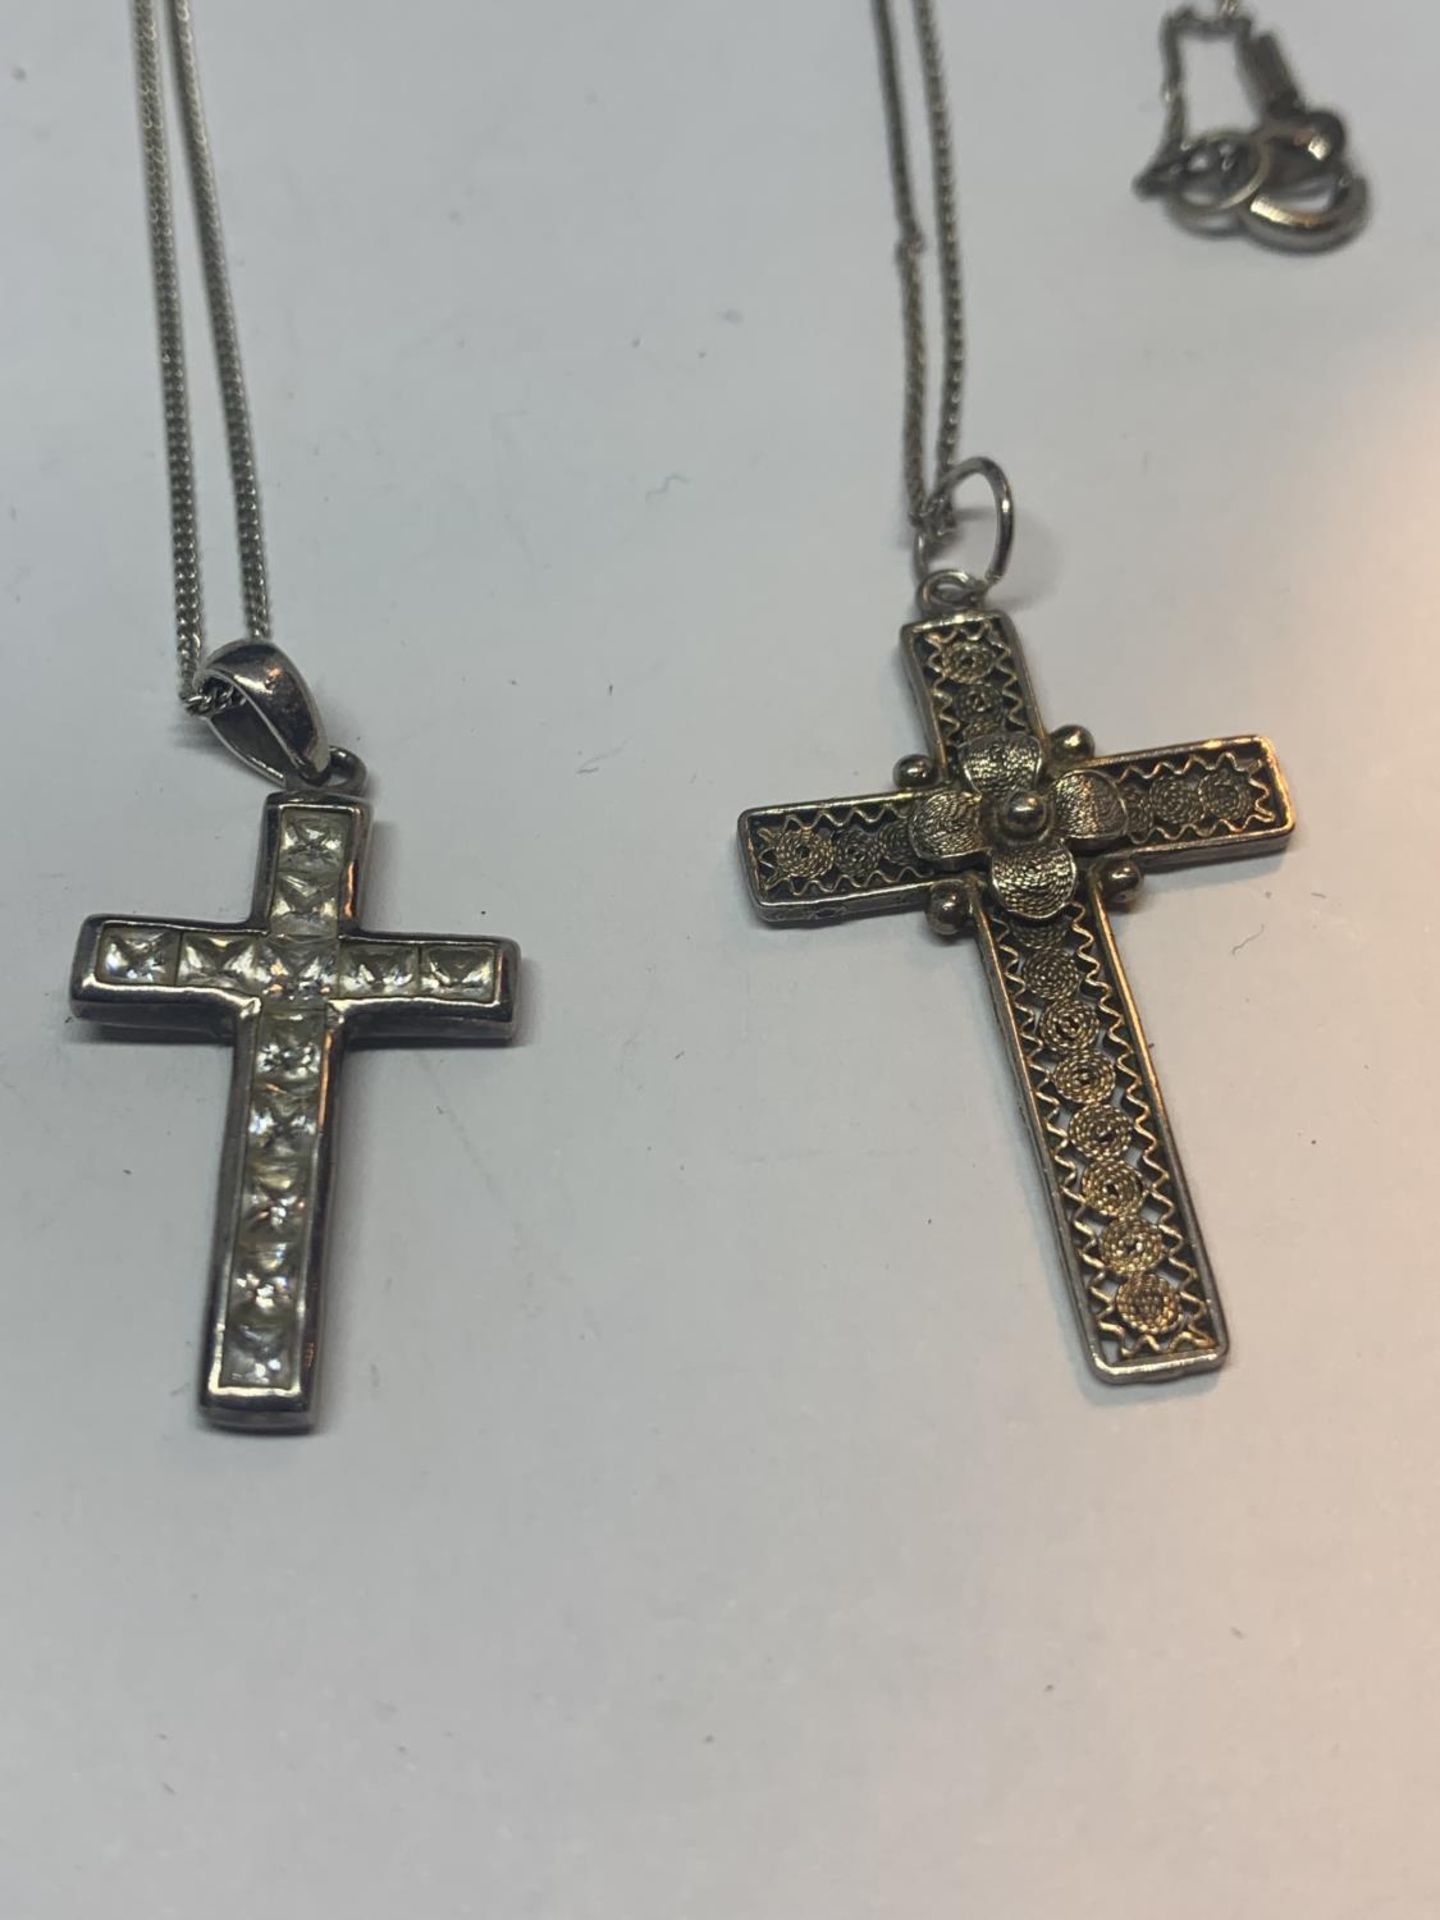 FOUR SILVER NECKLACES WITH CROSS PENDANTS IN A PRESENTATION BOX - Image 3 of 3